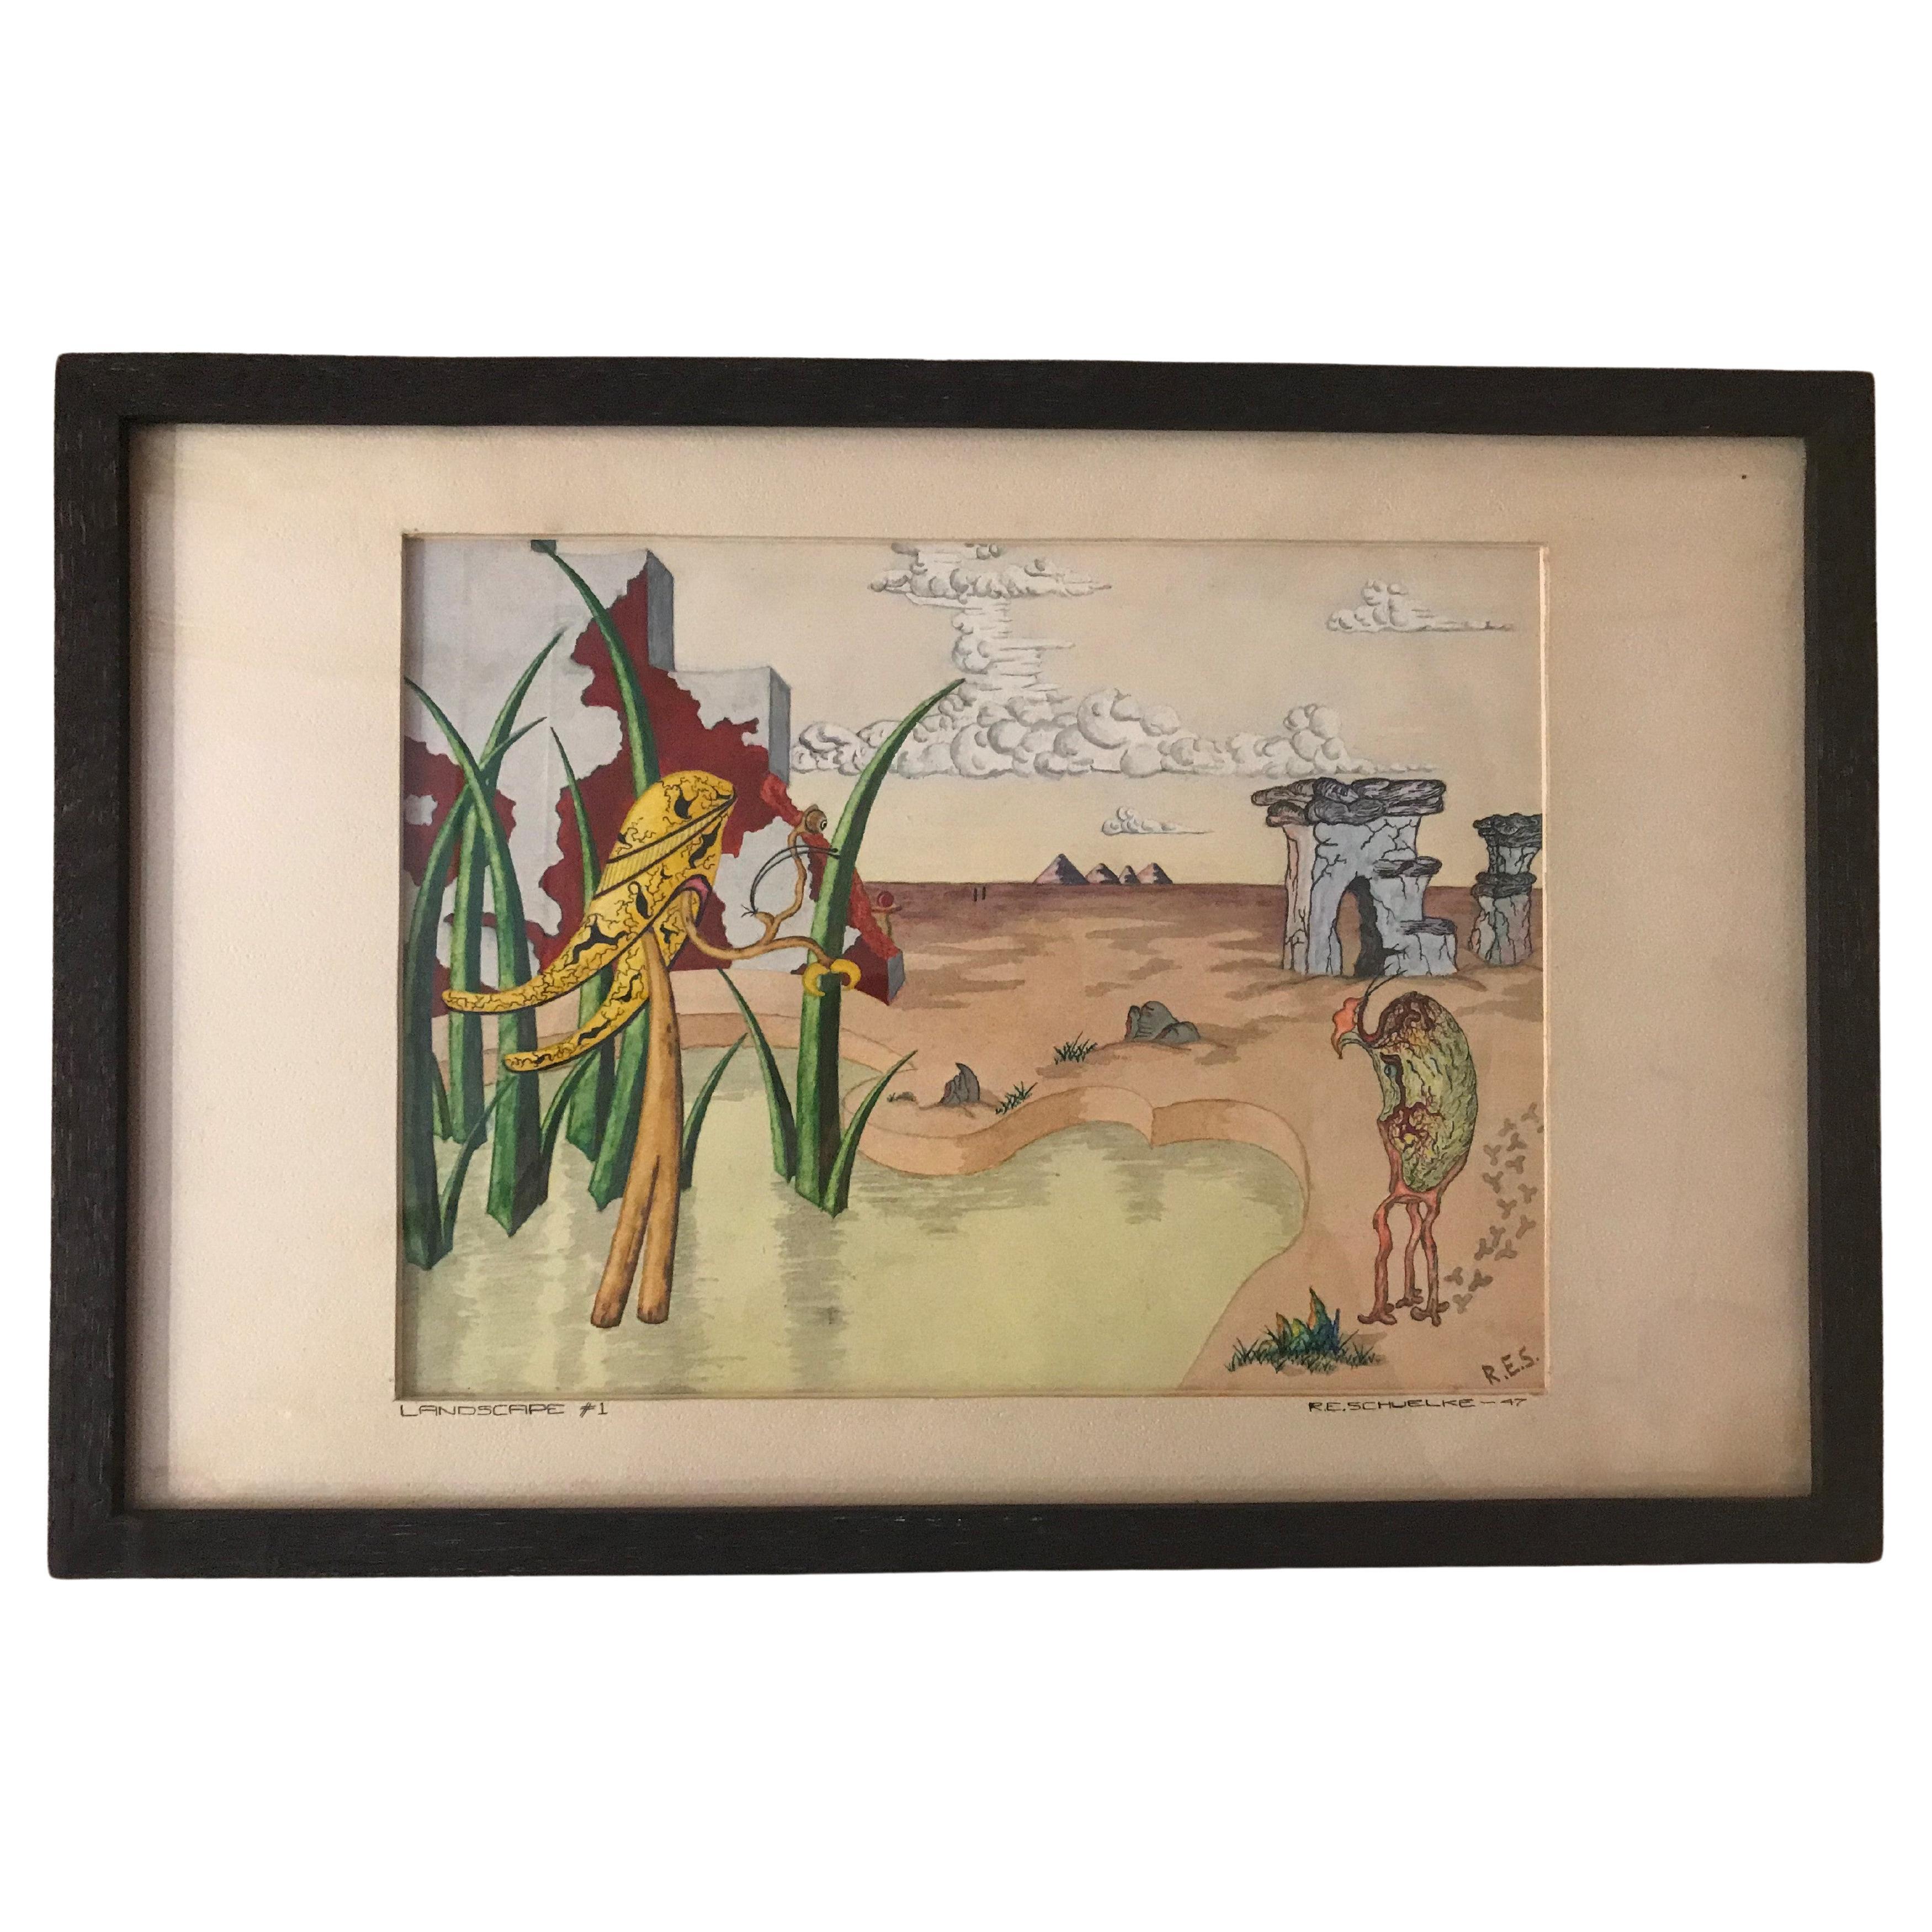 Surrealist Landscape Watercolor Signed R. E. Schwelke and Dated 1947